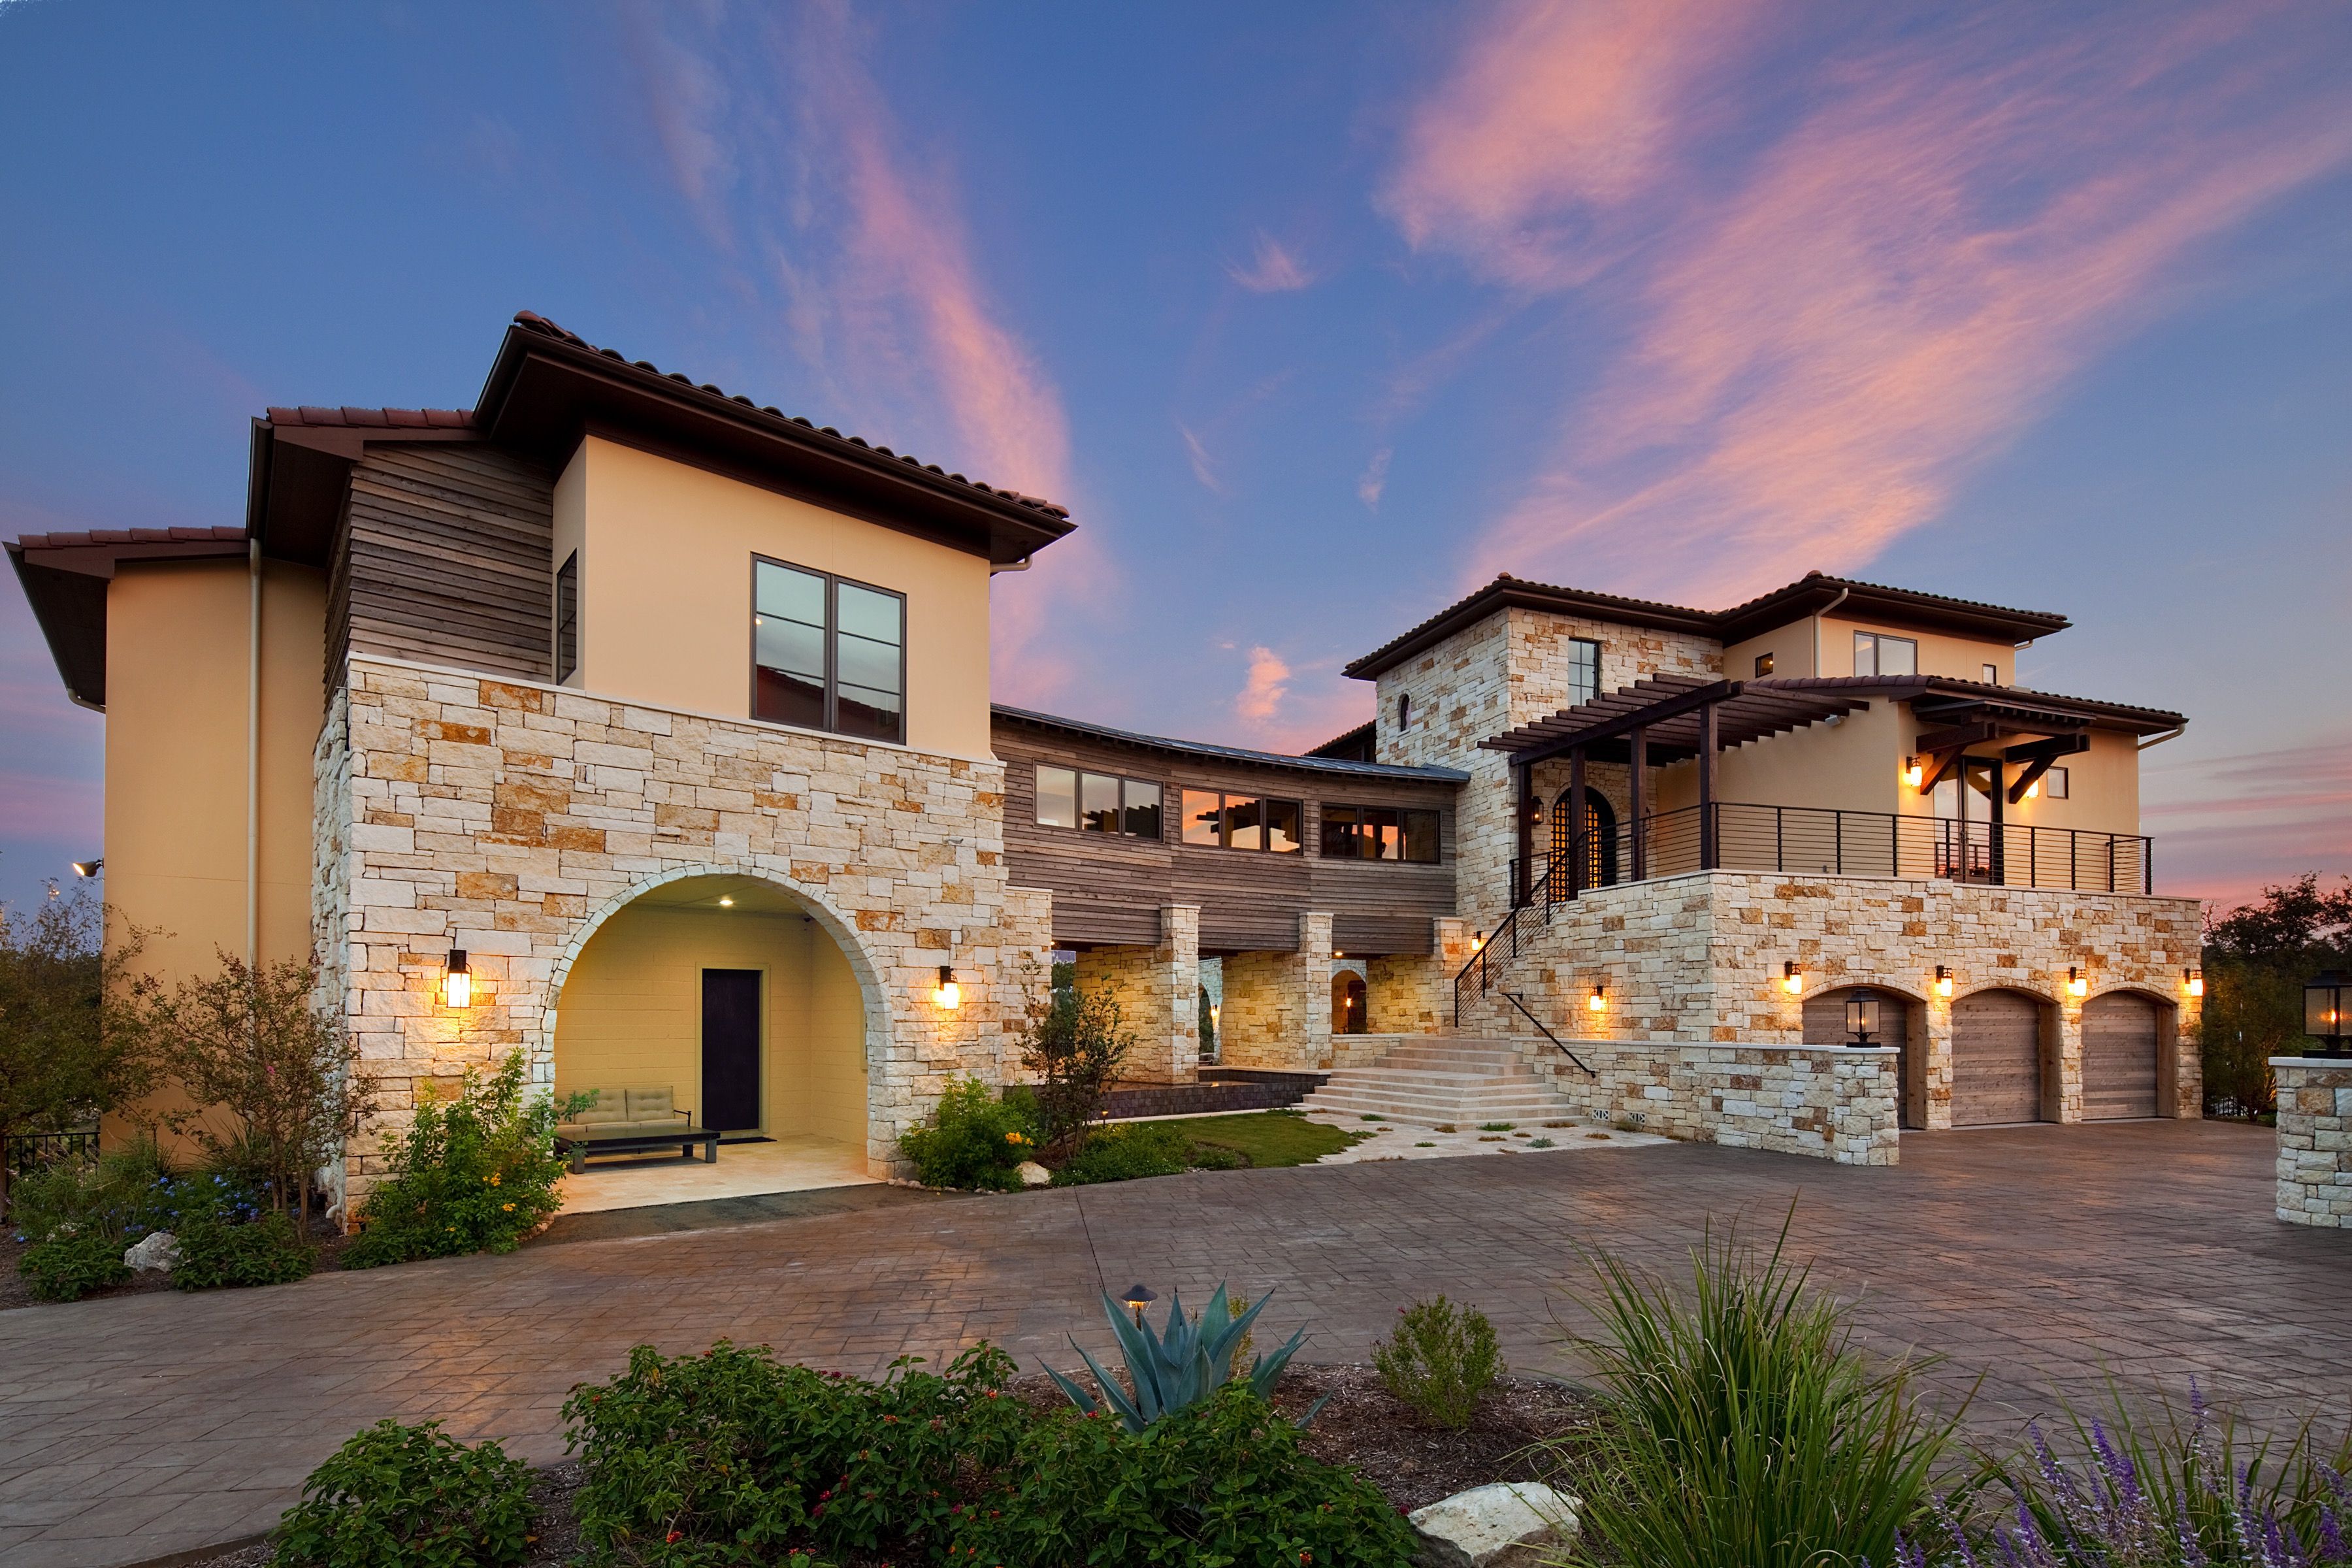 Contemporary Style Mediterranean House Exterior (Image 8 of 30)